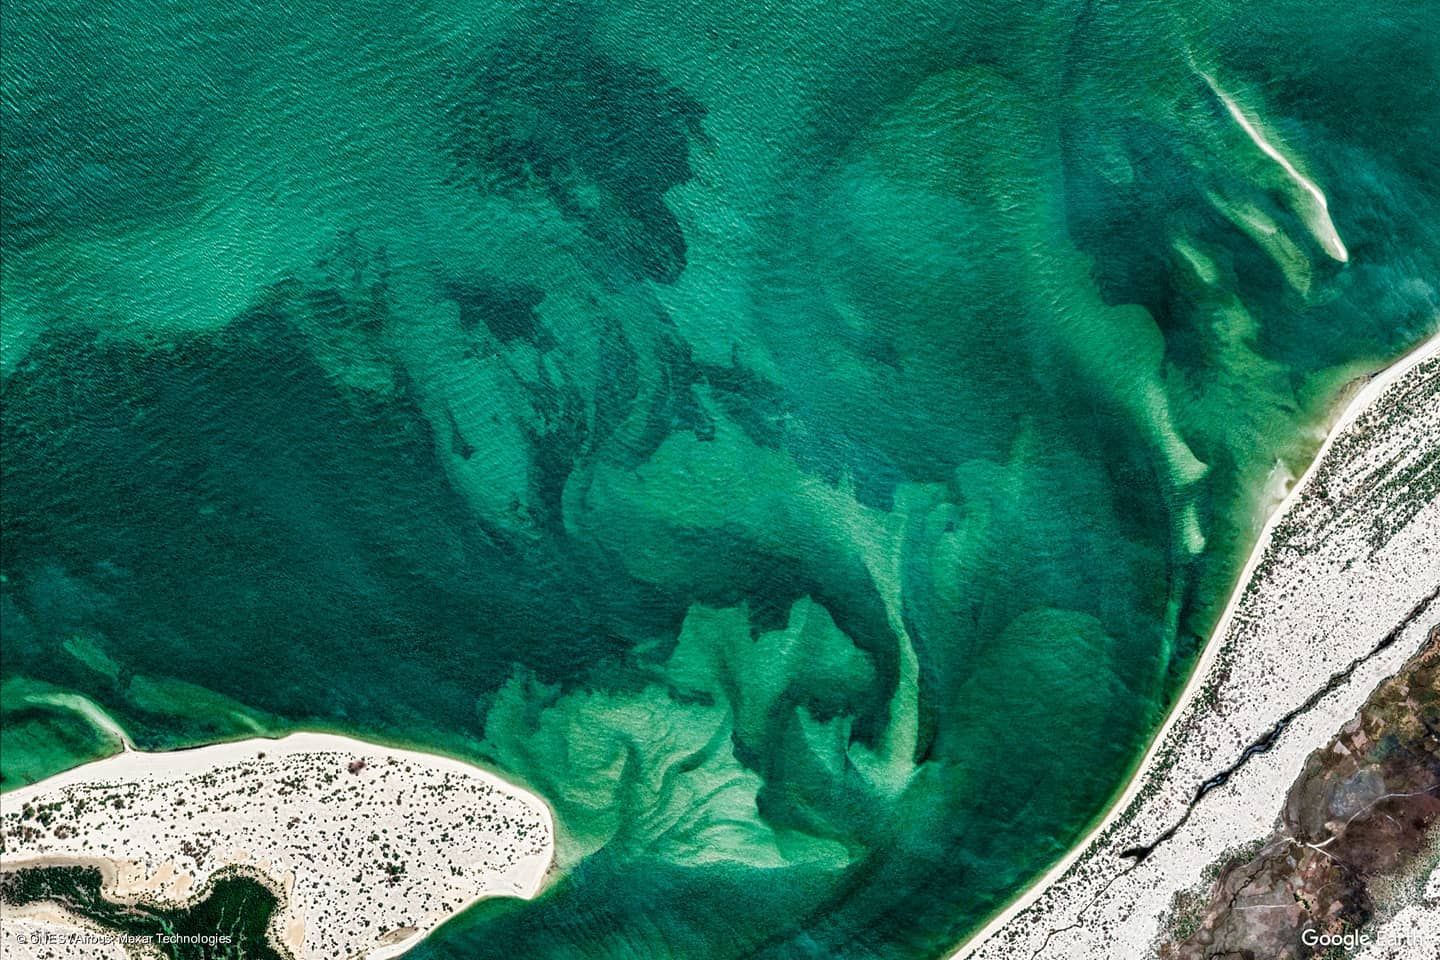 Eyes above the earth on Instagram: “Water and soul. They are mixed with life.  Images ©2015 CNES / Astrium, Maxar Technologies  #earth #discoverearth #dronephotography…”